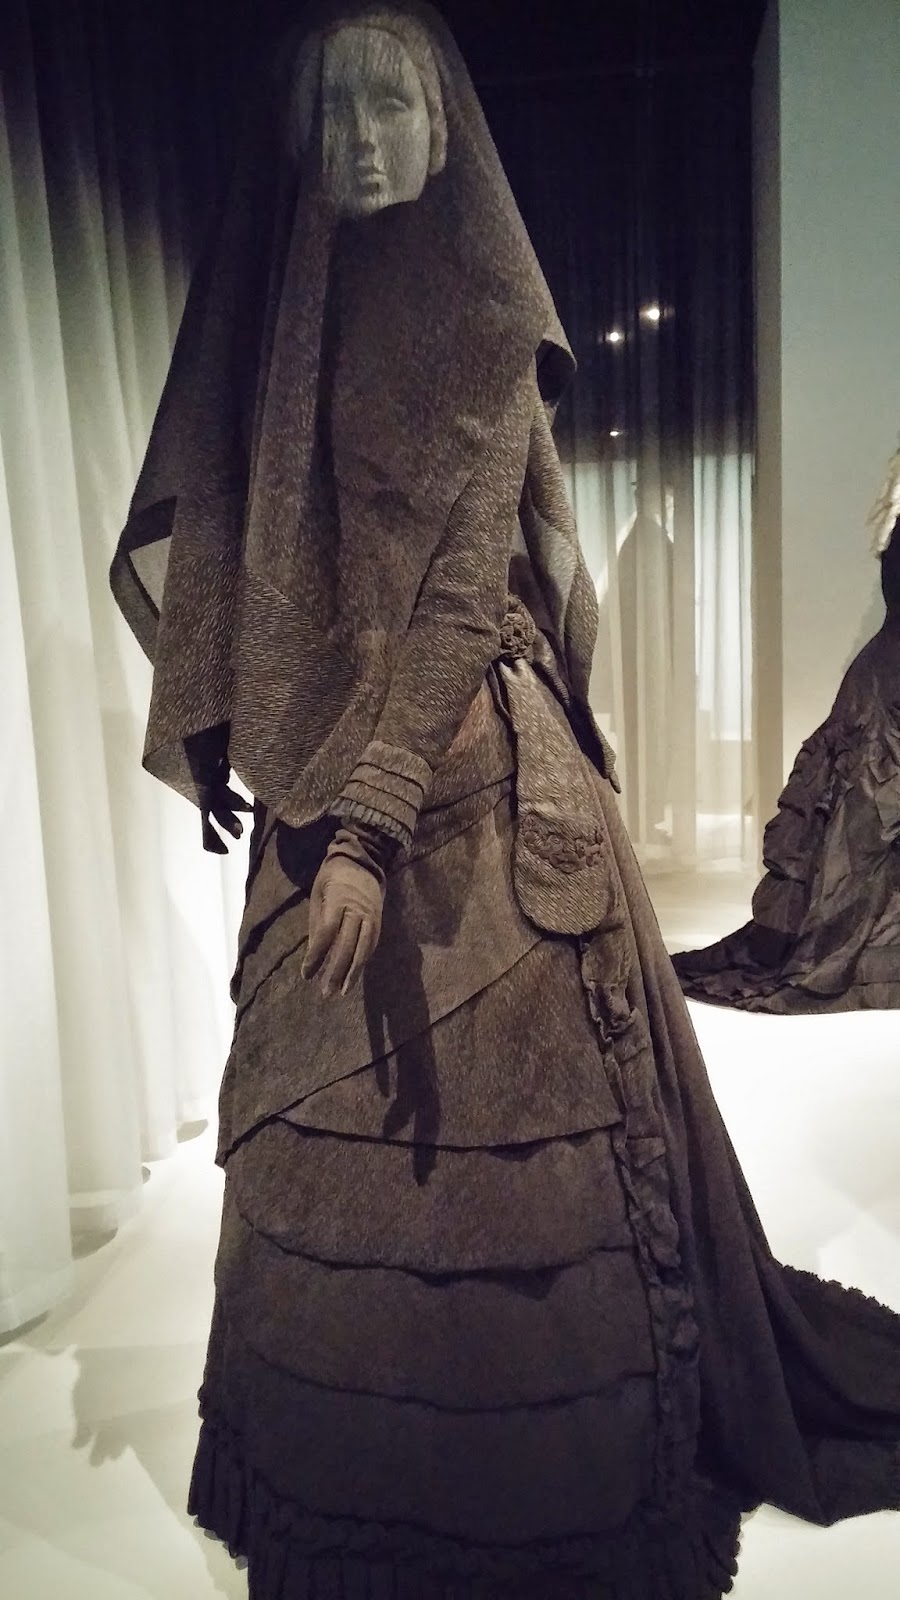 Death Becomes Her: Victorian Mourning Fashion at the Met